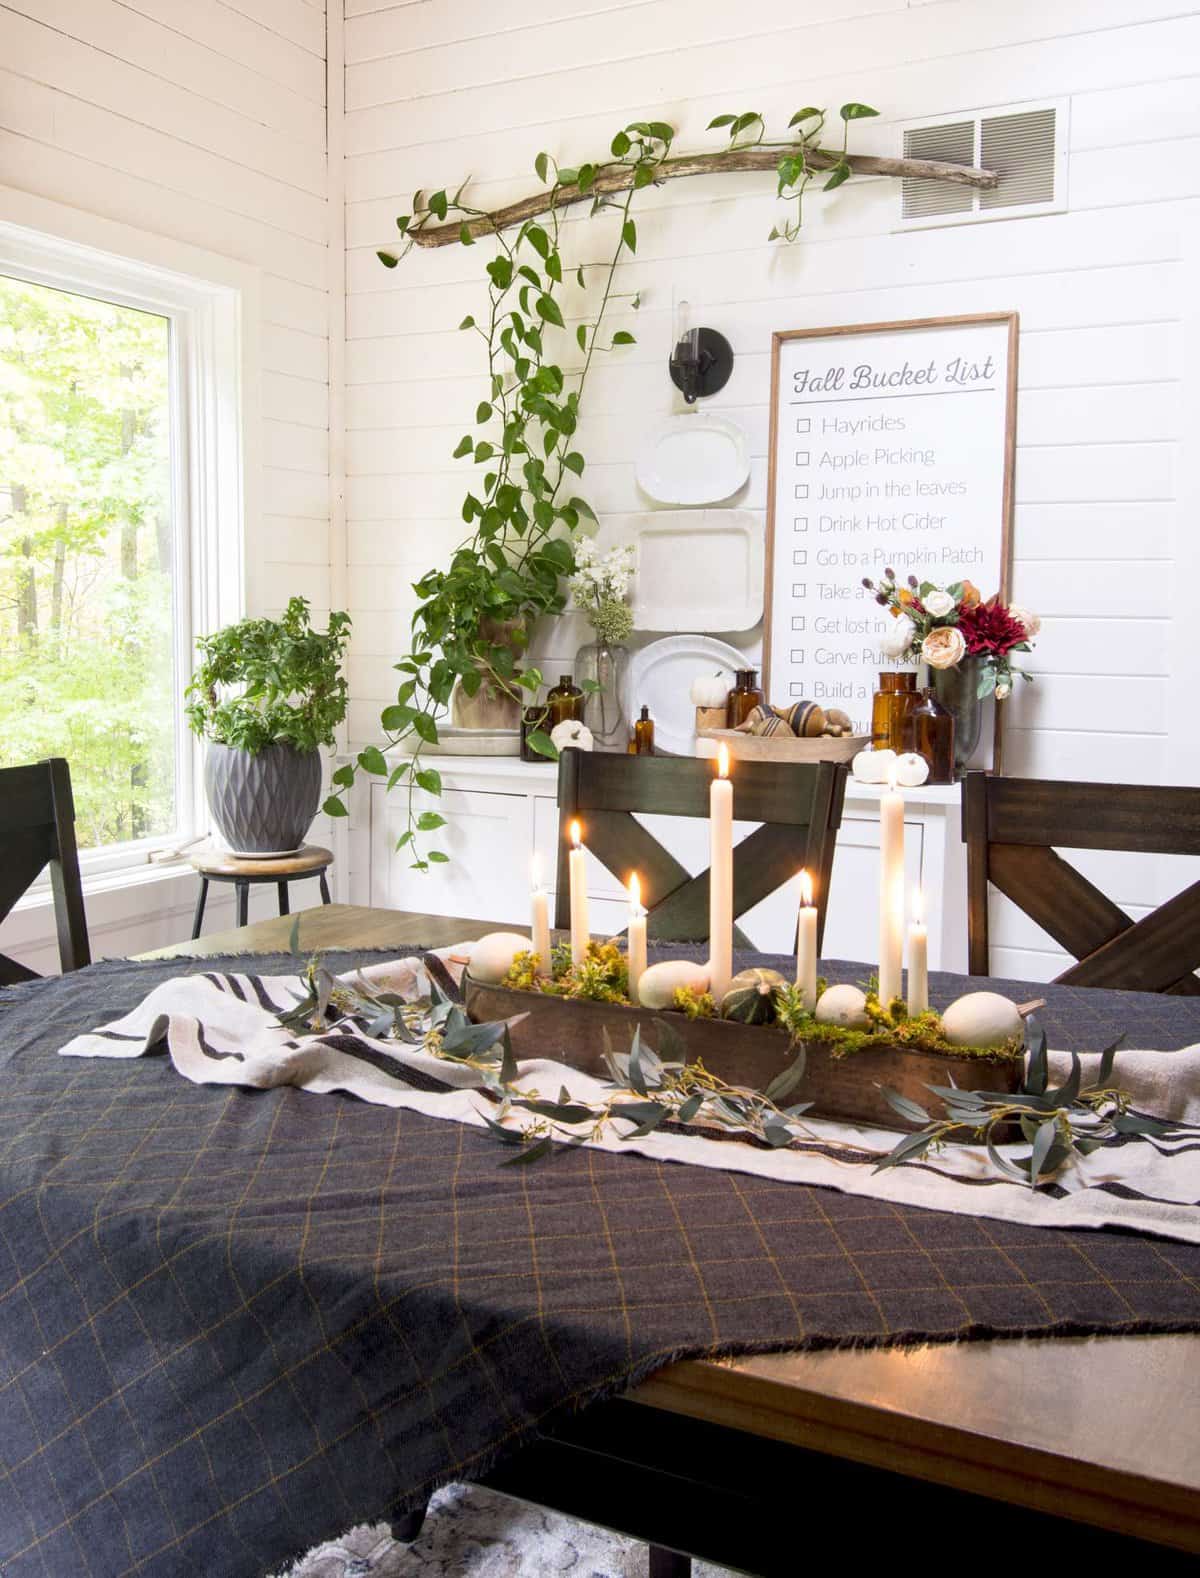 Do you want to refine your rustic dining room this fall? Here are easy ways to elevate your rustic style for a cozy dining room decorated for fall.